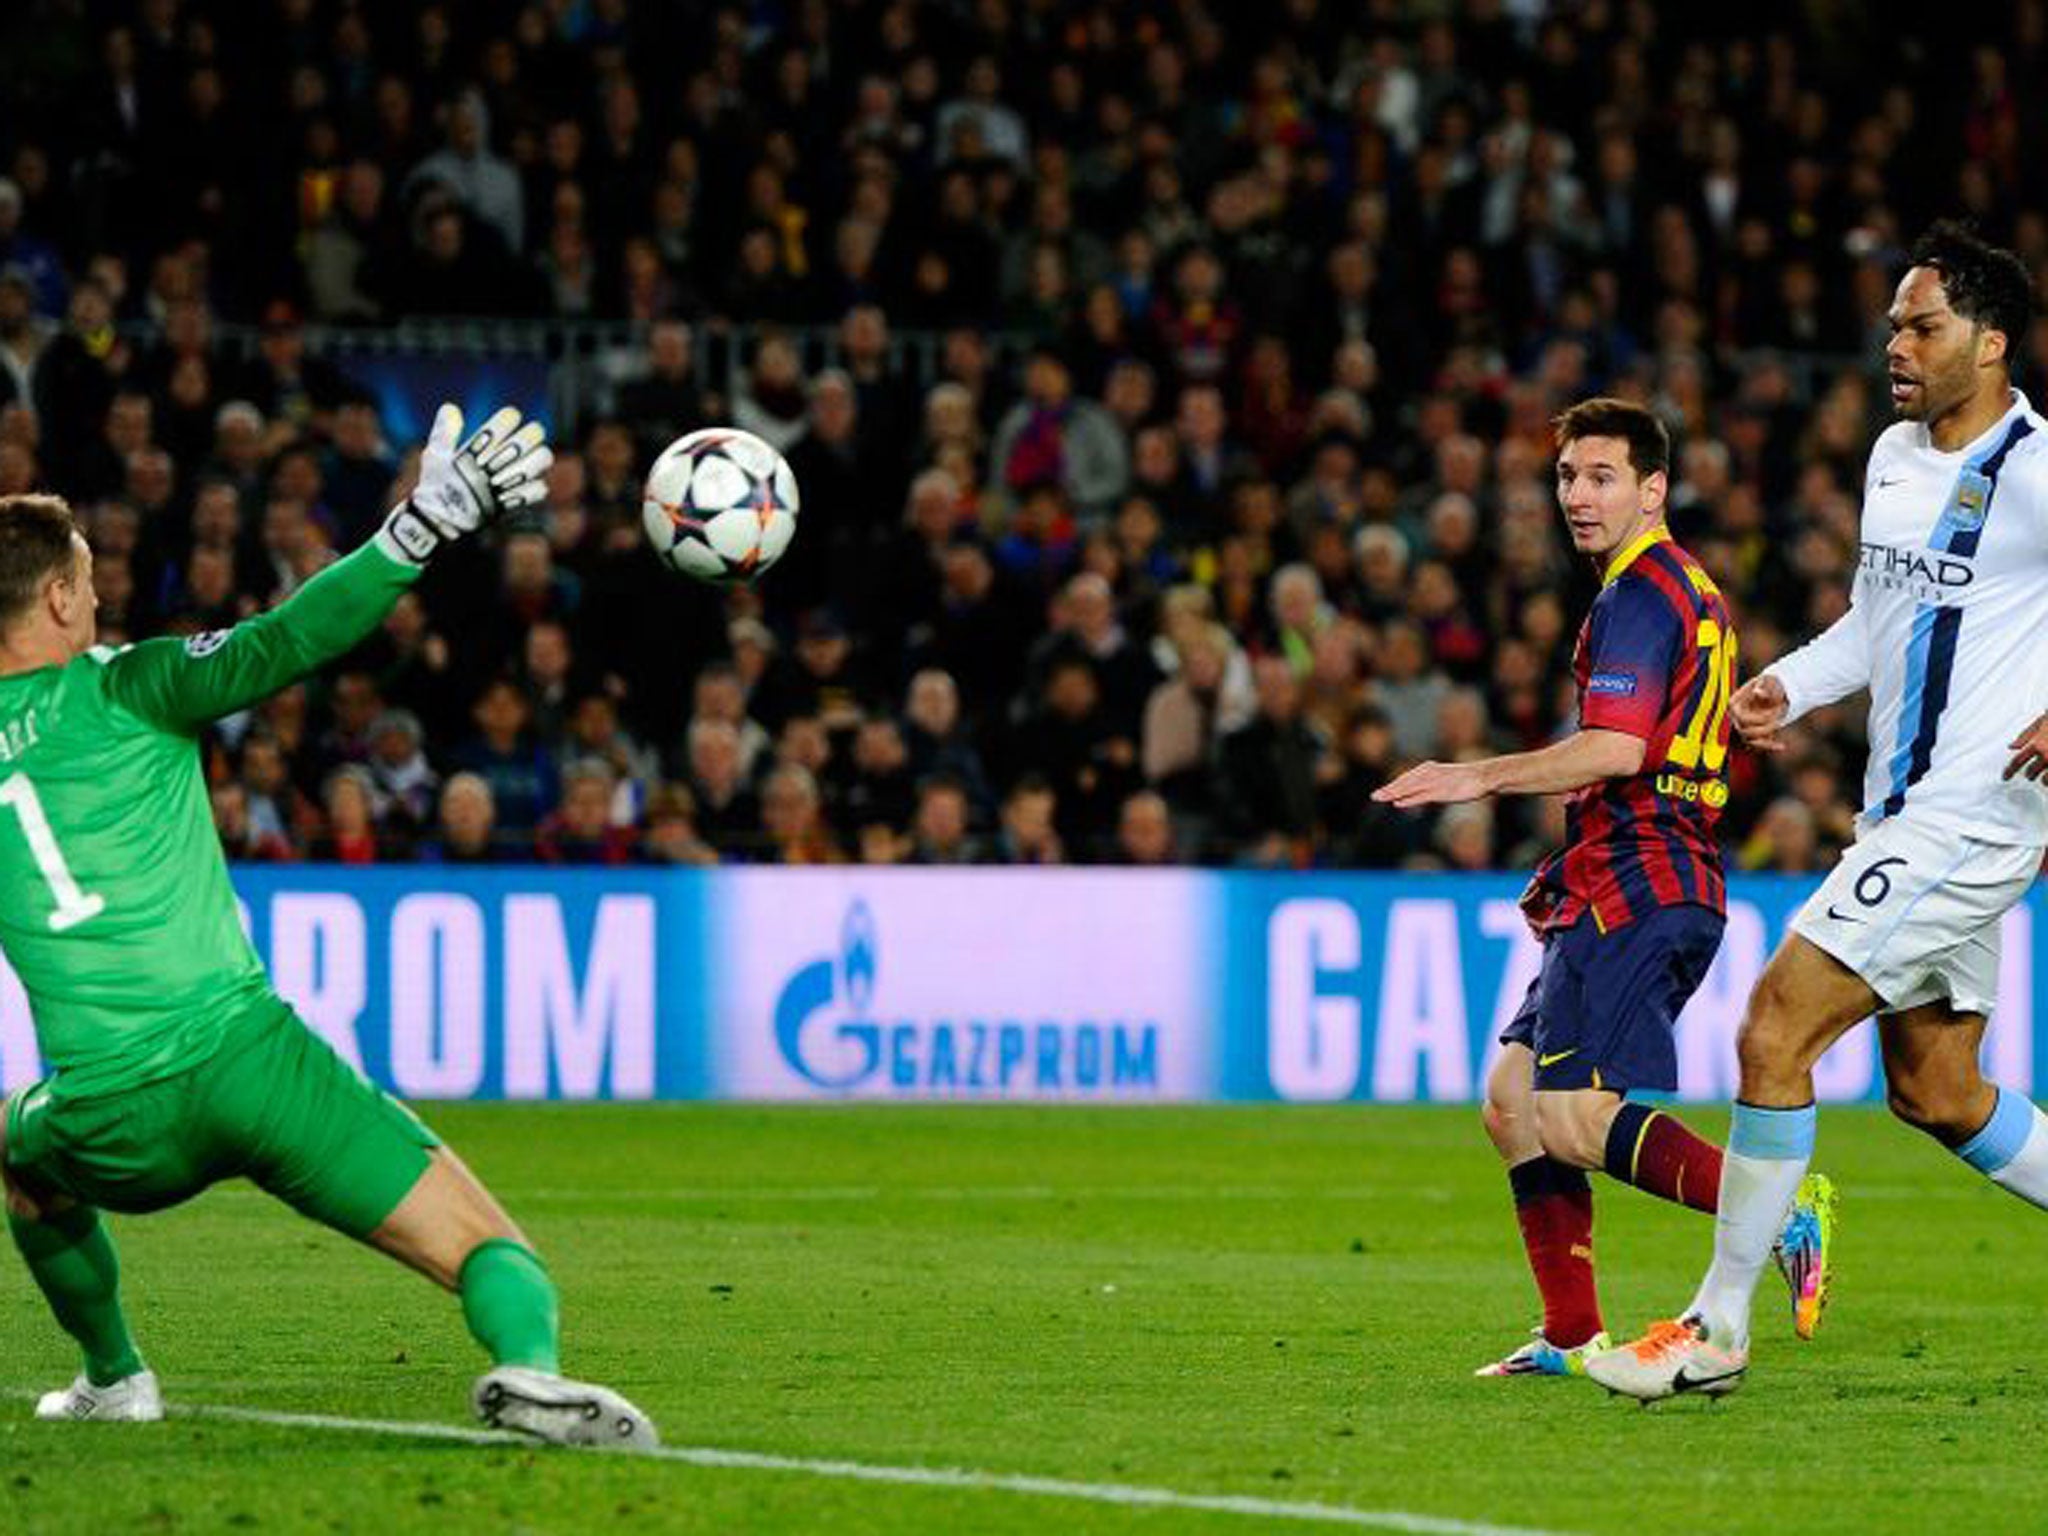 Lionel Messi opens the scoring for Barcelona